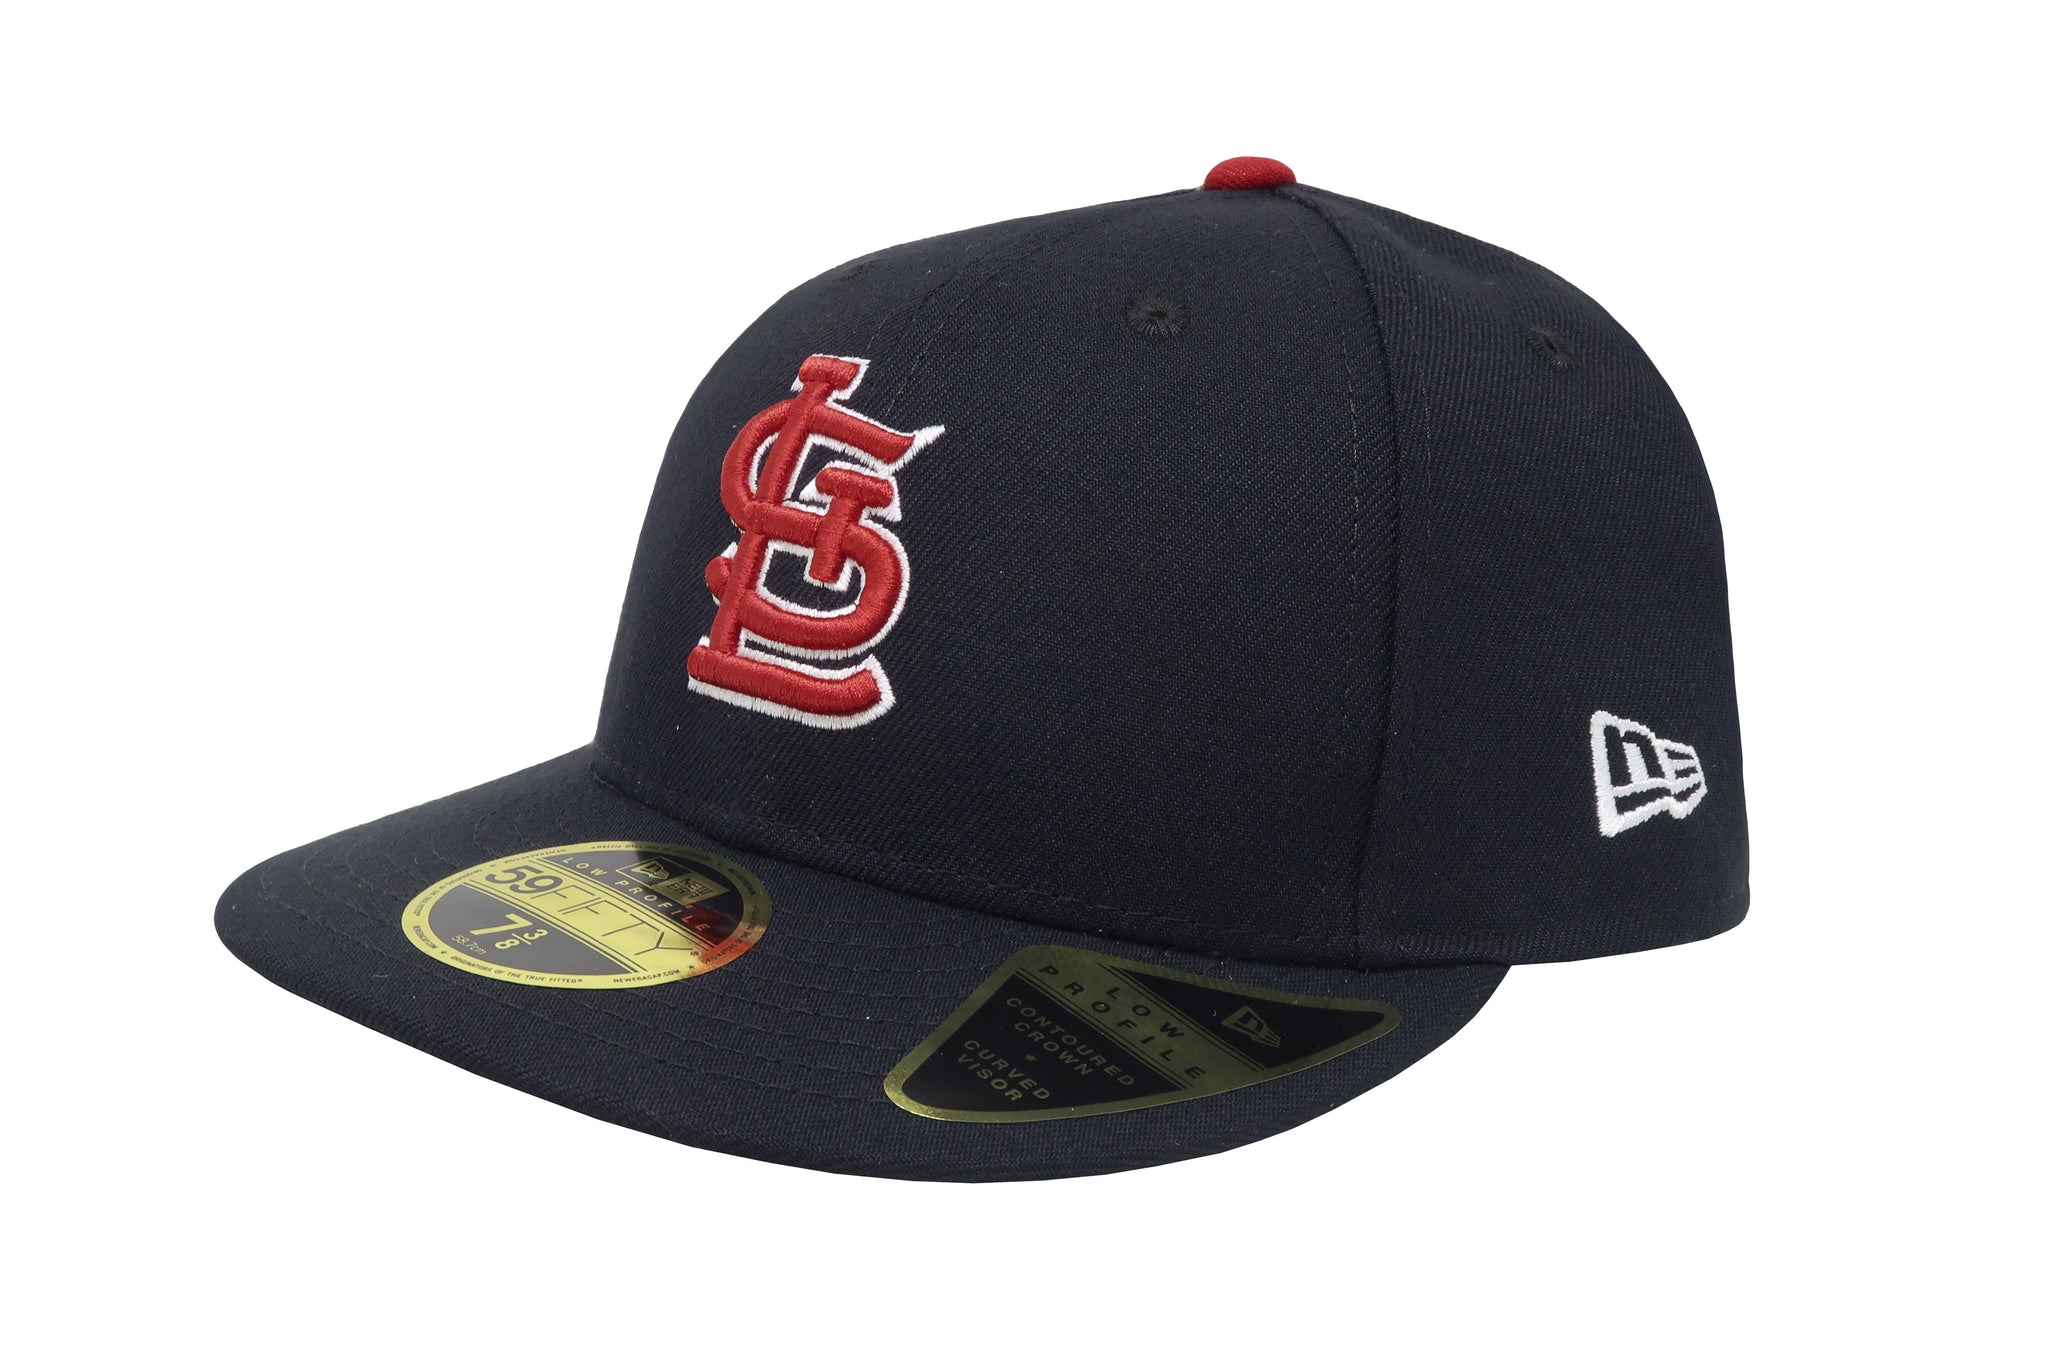 St. Louis Cardinals New Era Black & White Low Profile 59FIFTY Fitted Hat